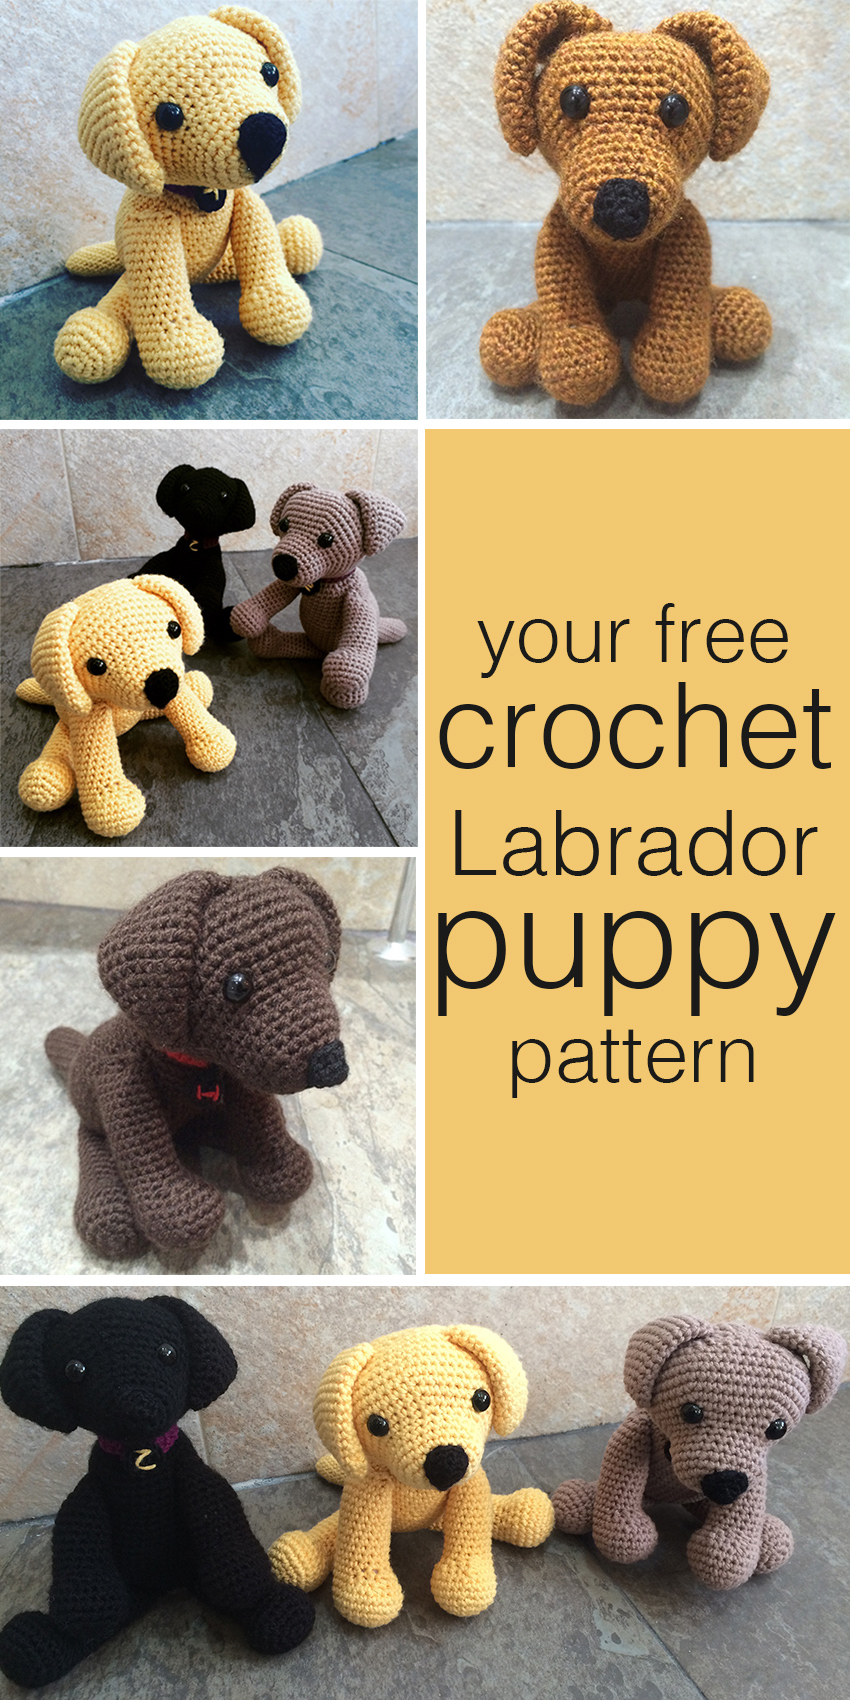 Crochet Dog Pattern Crochet Labrador How To Make Your Own Toy Dog The Labrador Site